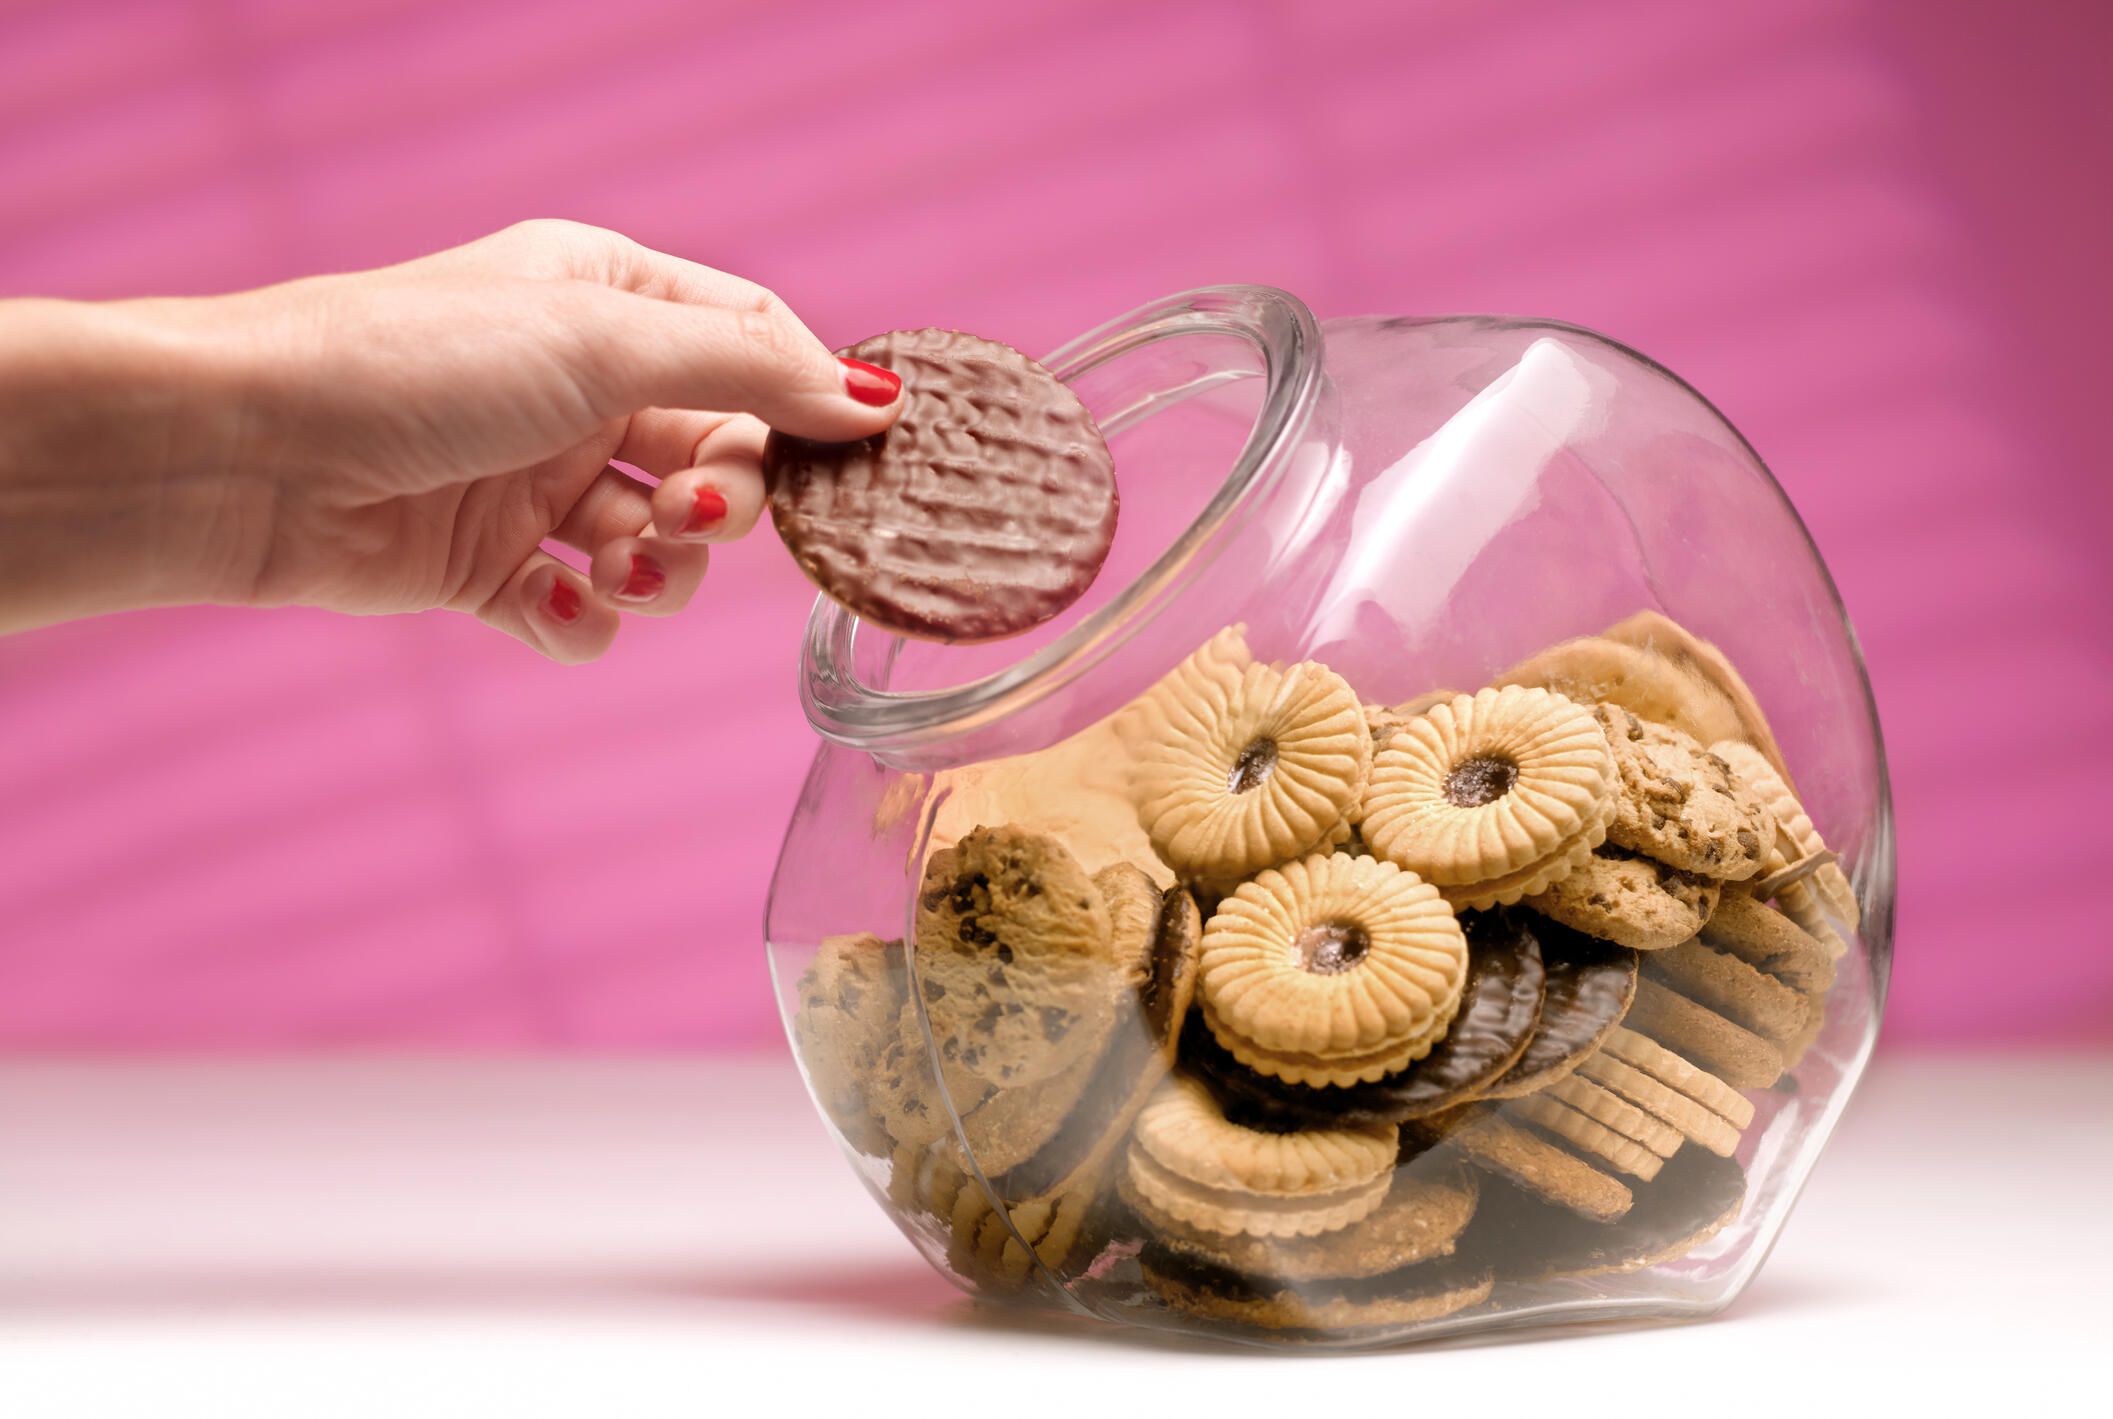 hand taking a cookie out of a cookie jar, pink background